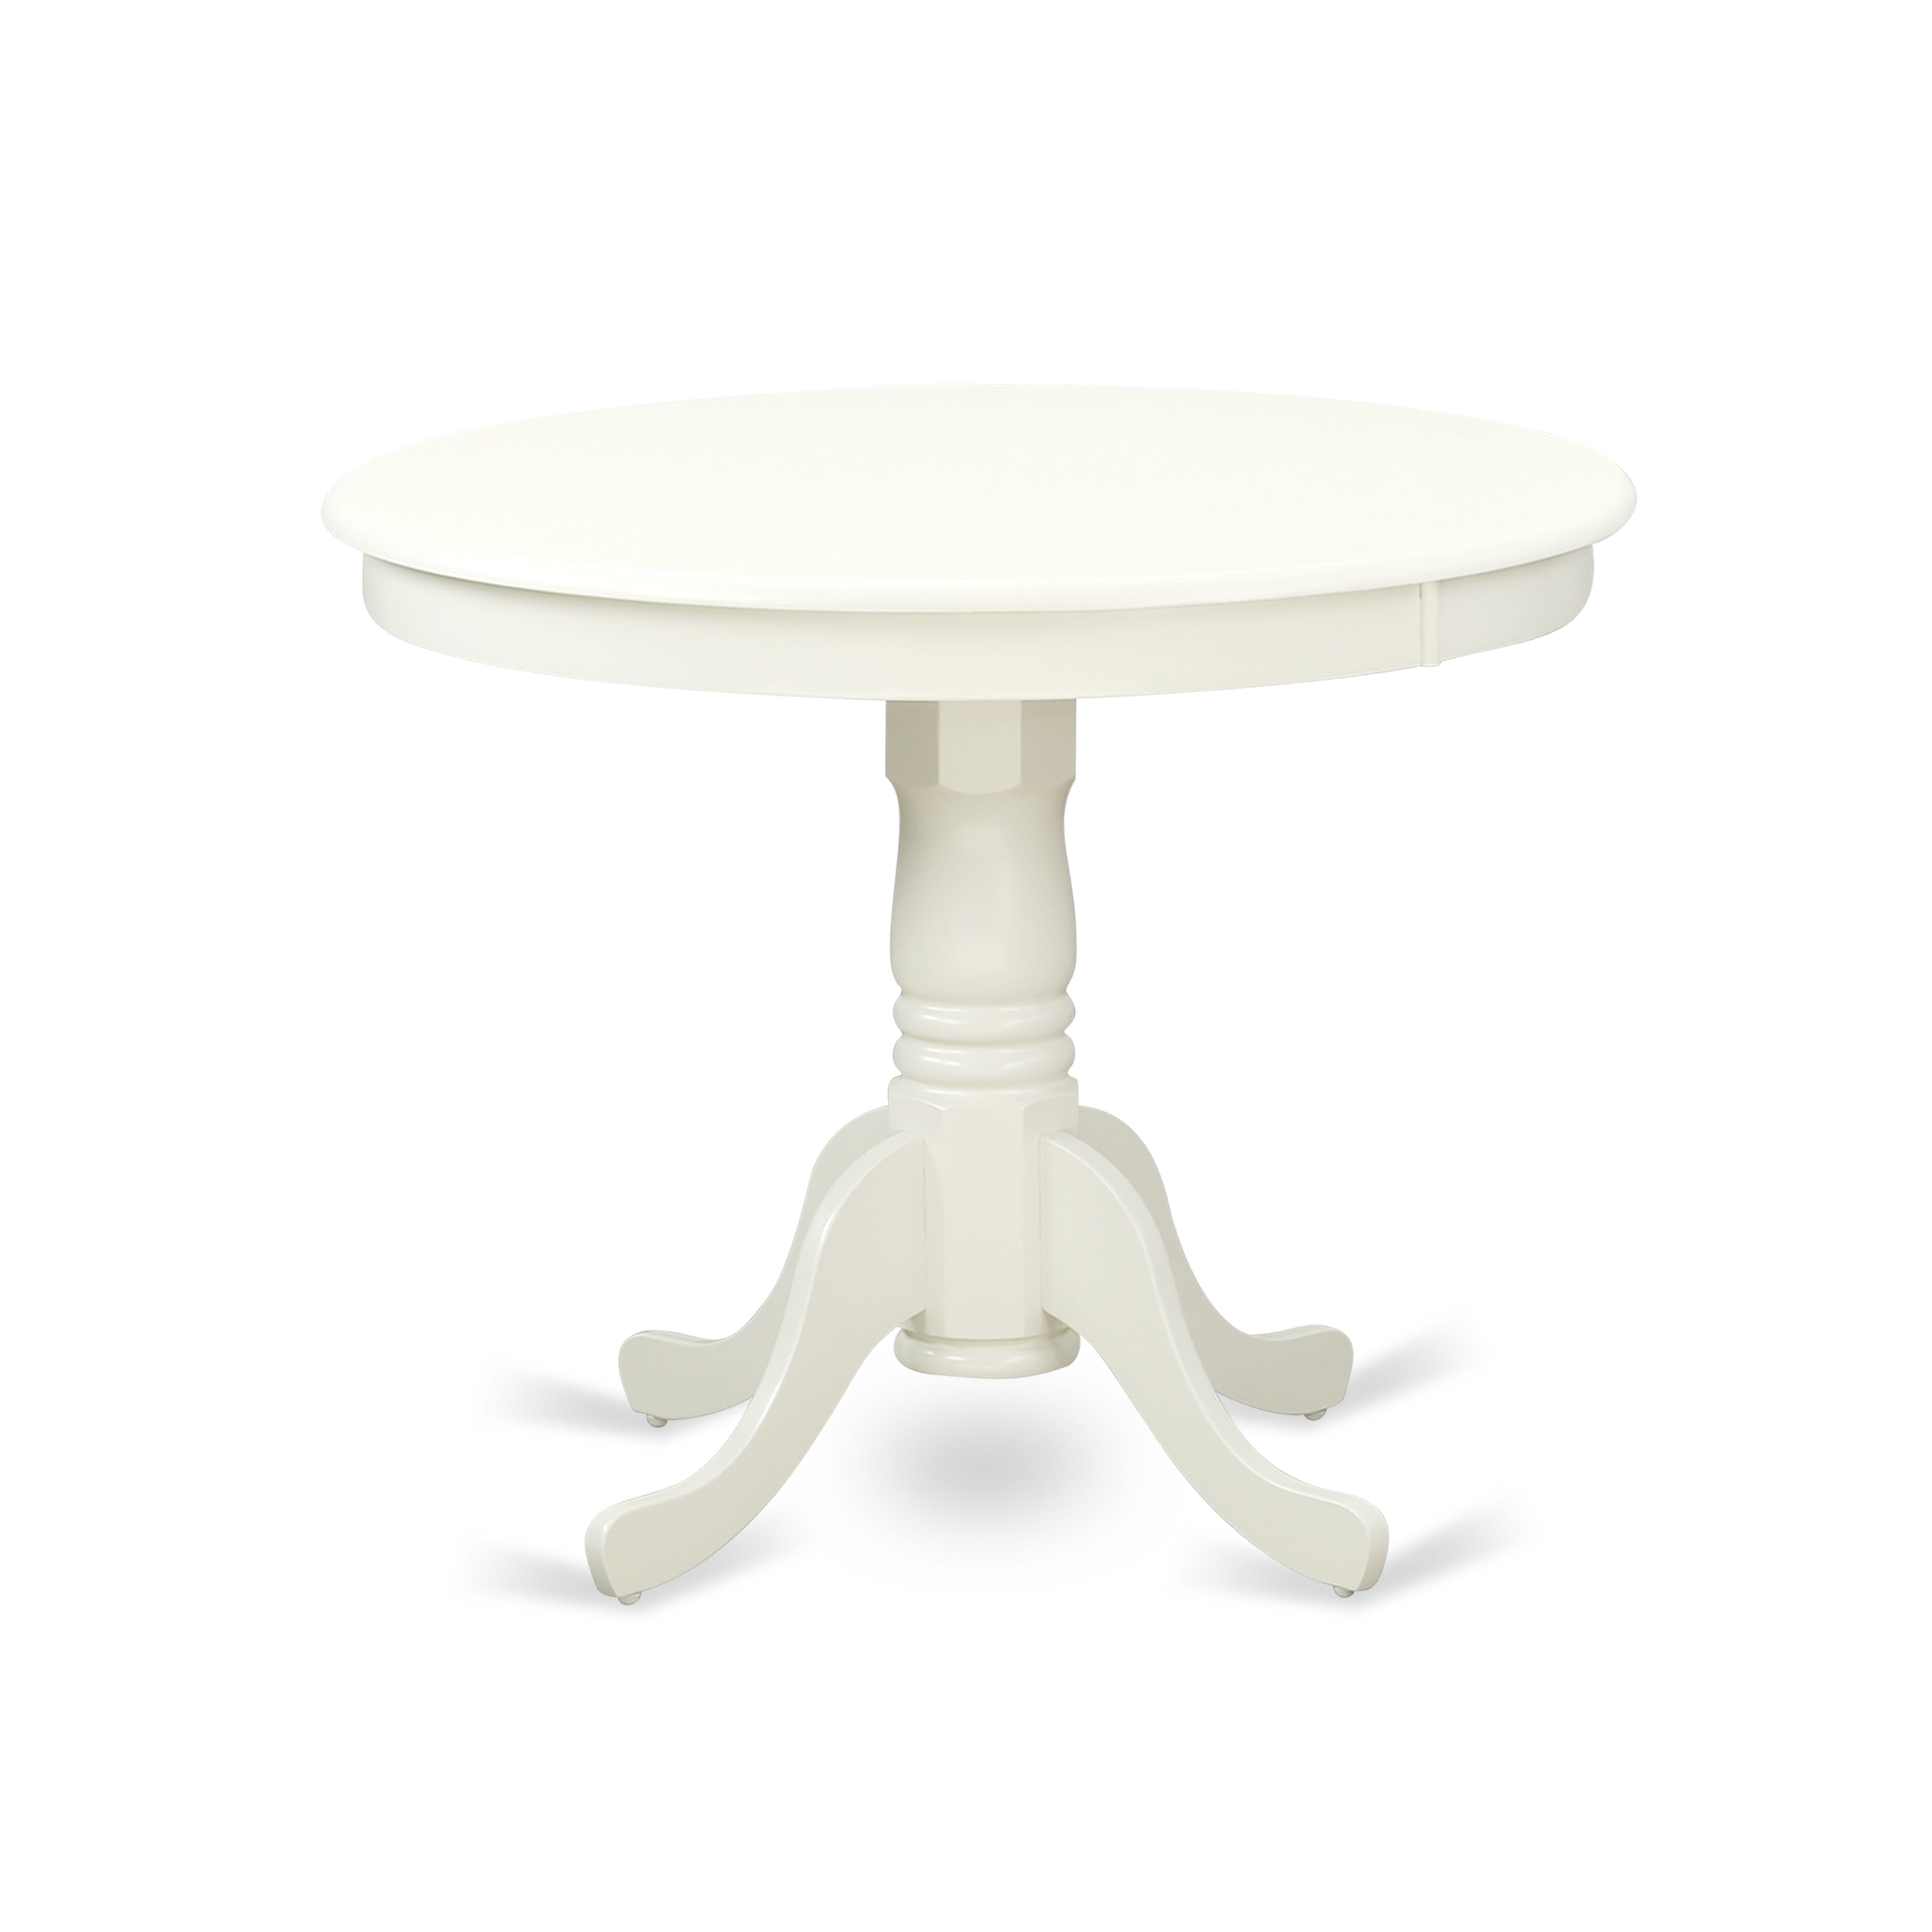 ANAB5-LWH-64 5Pc Round 36" Table And 4 Parson Chair With Linen White Leg And Pu Leather Color White